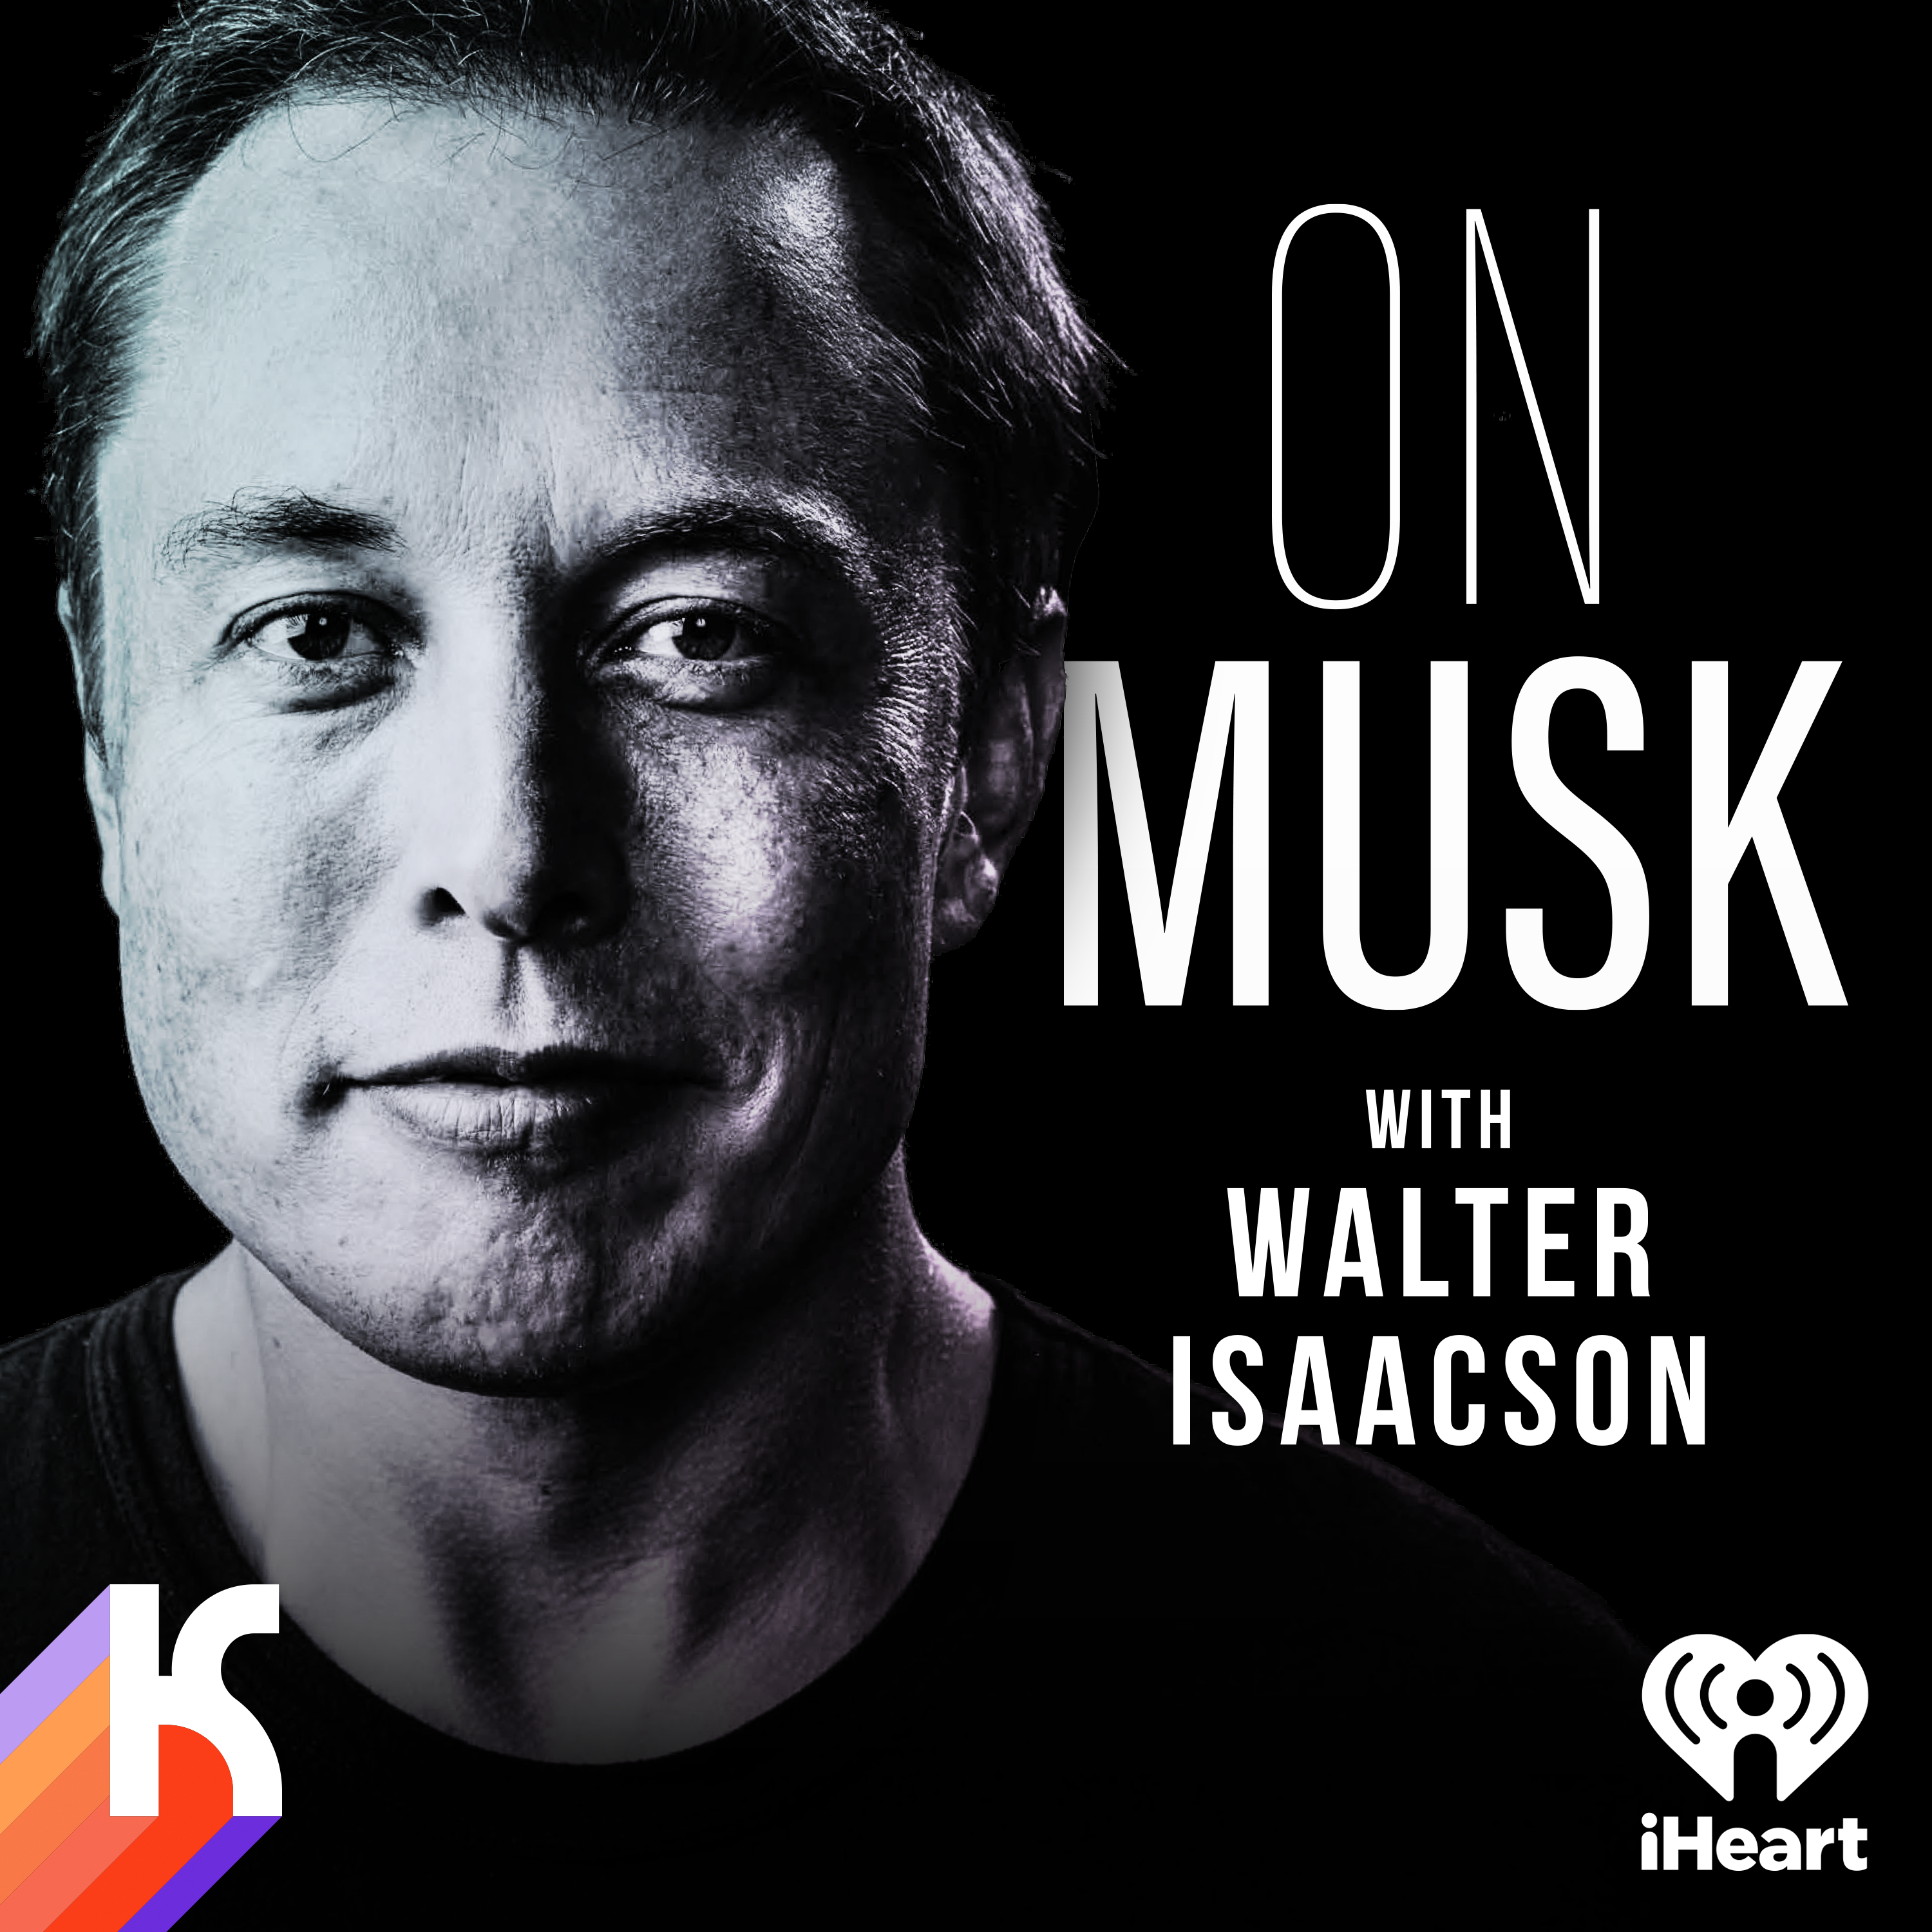 On Musk with Walter Isaacson podcast show image